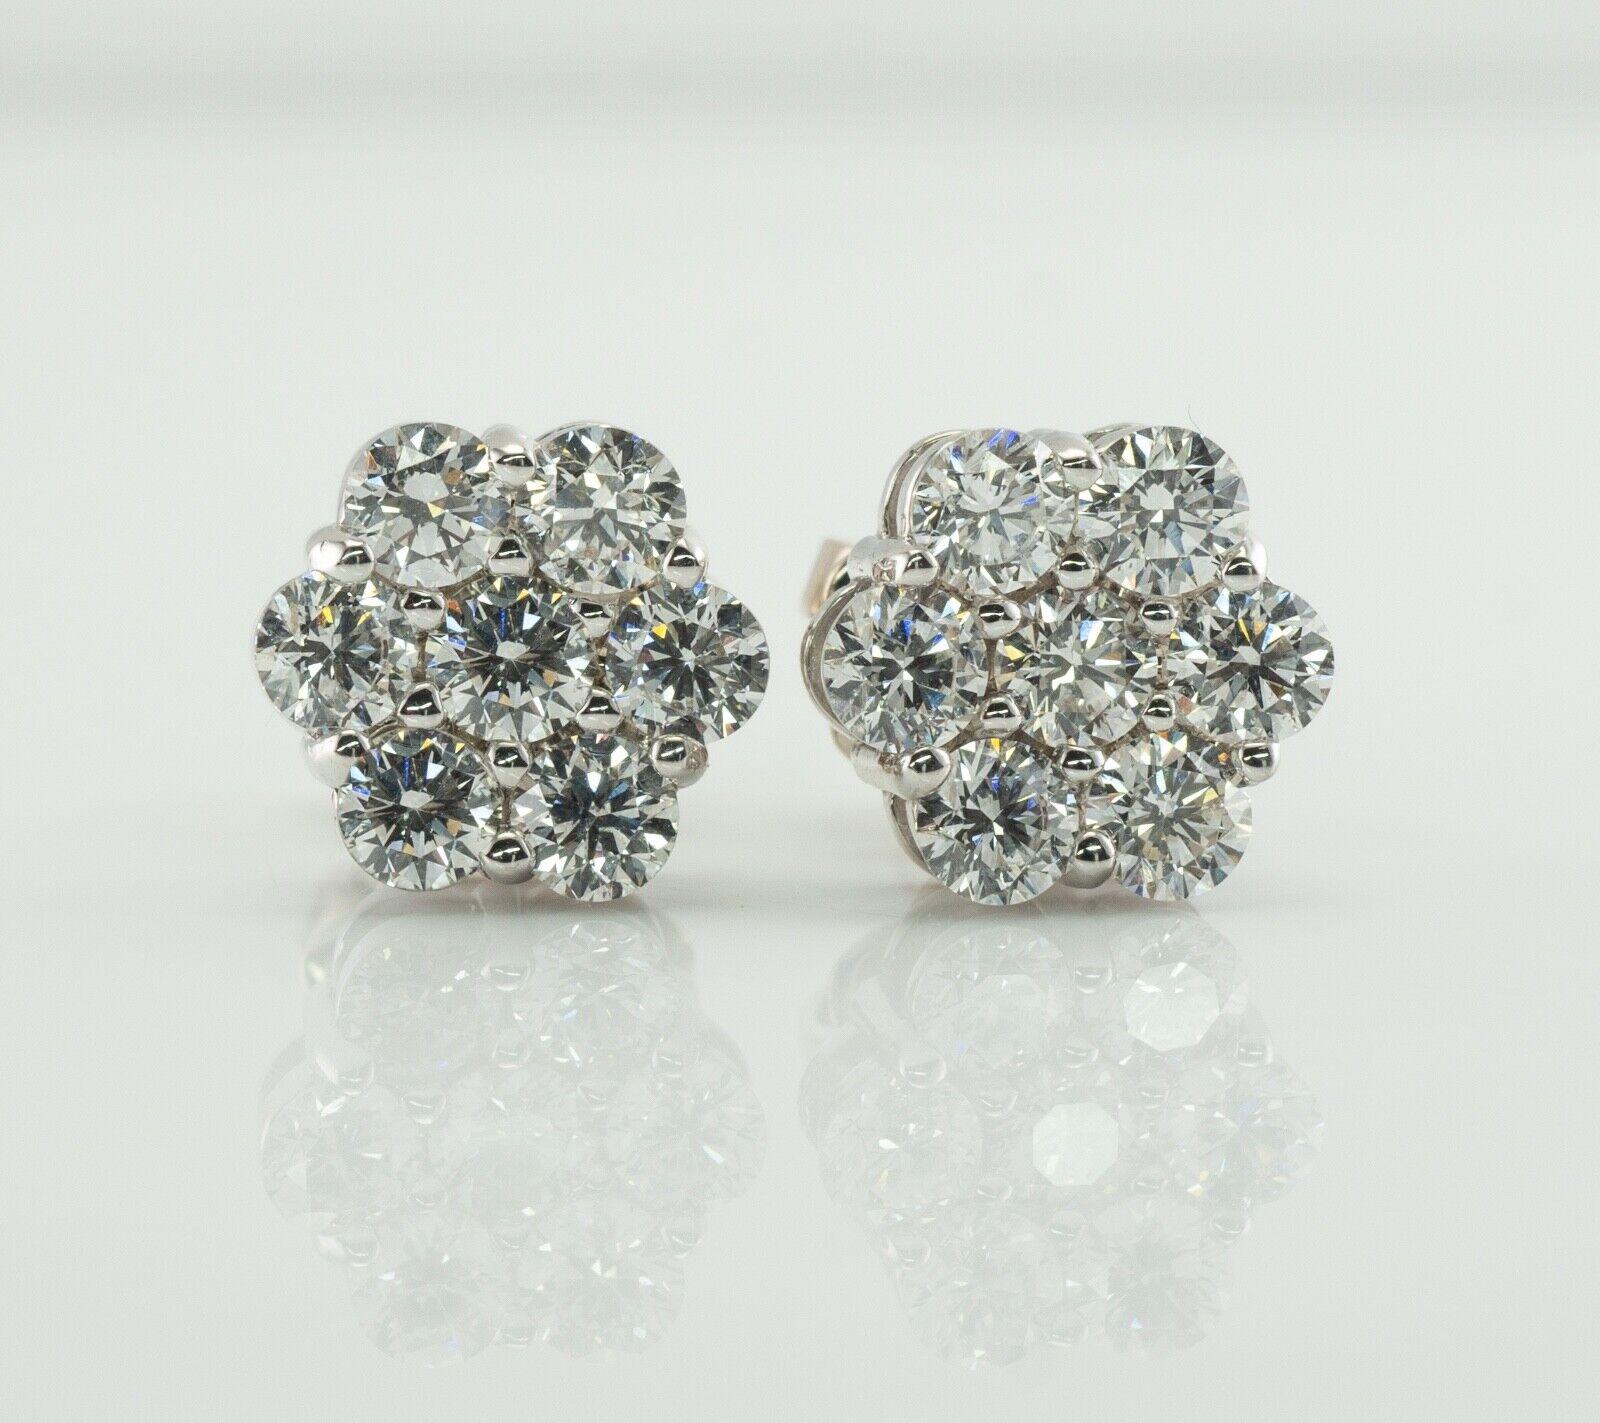 This pair of diamond cluster studs is crafted in solid 14K White Gold. There are seven natural round brilliant cut diamonds totaling 1.12 carats for the pair. The diamonds are VS2-SI1 clarity and HI color. The earrings are equipped with long posts